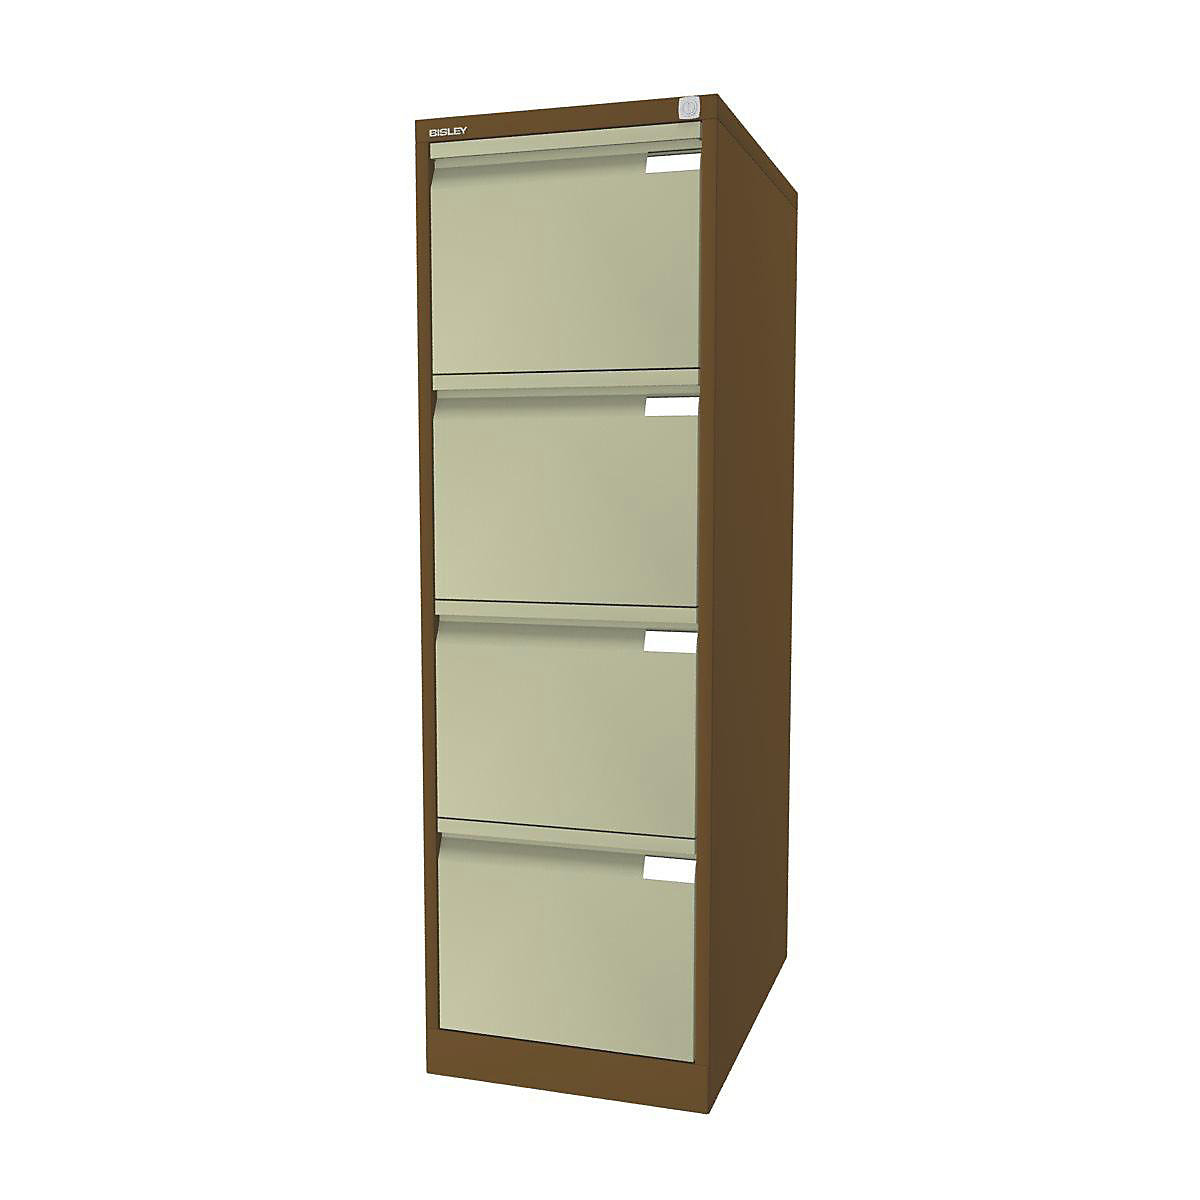 Suspension file cabinet, 1-track – BISLEY, 4 A4 drawers, sepia brown/creme-22